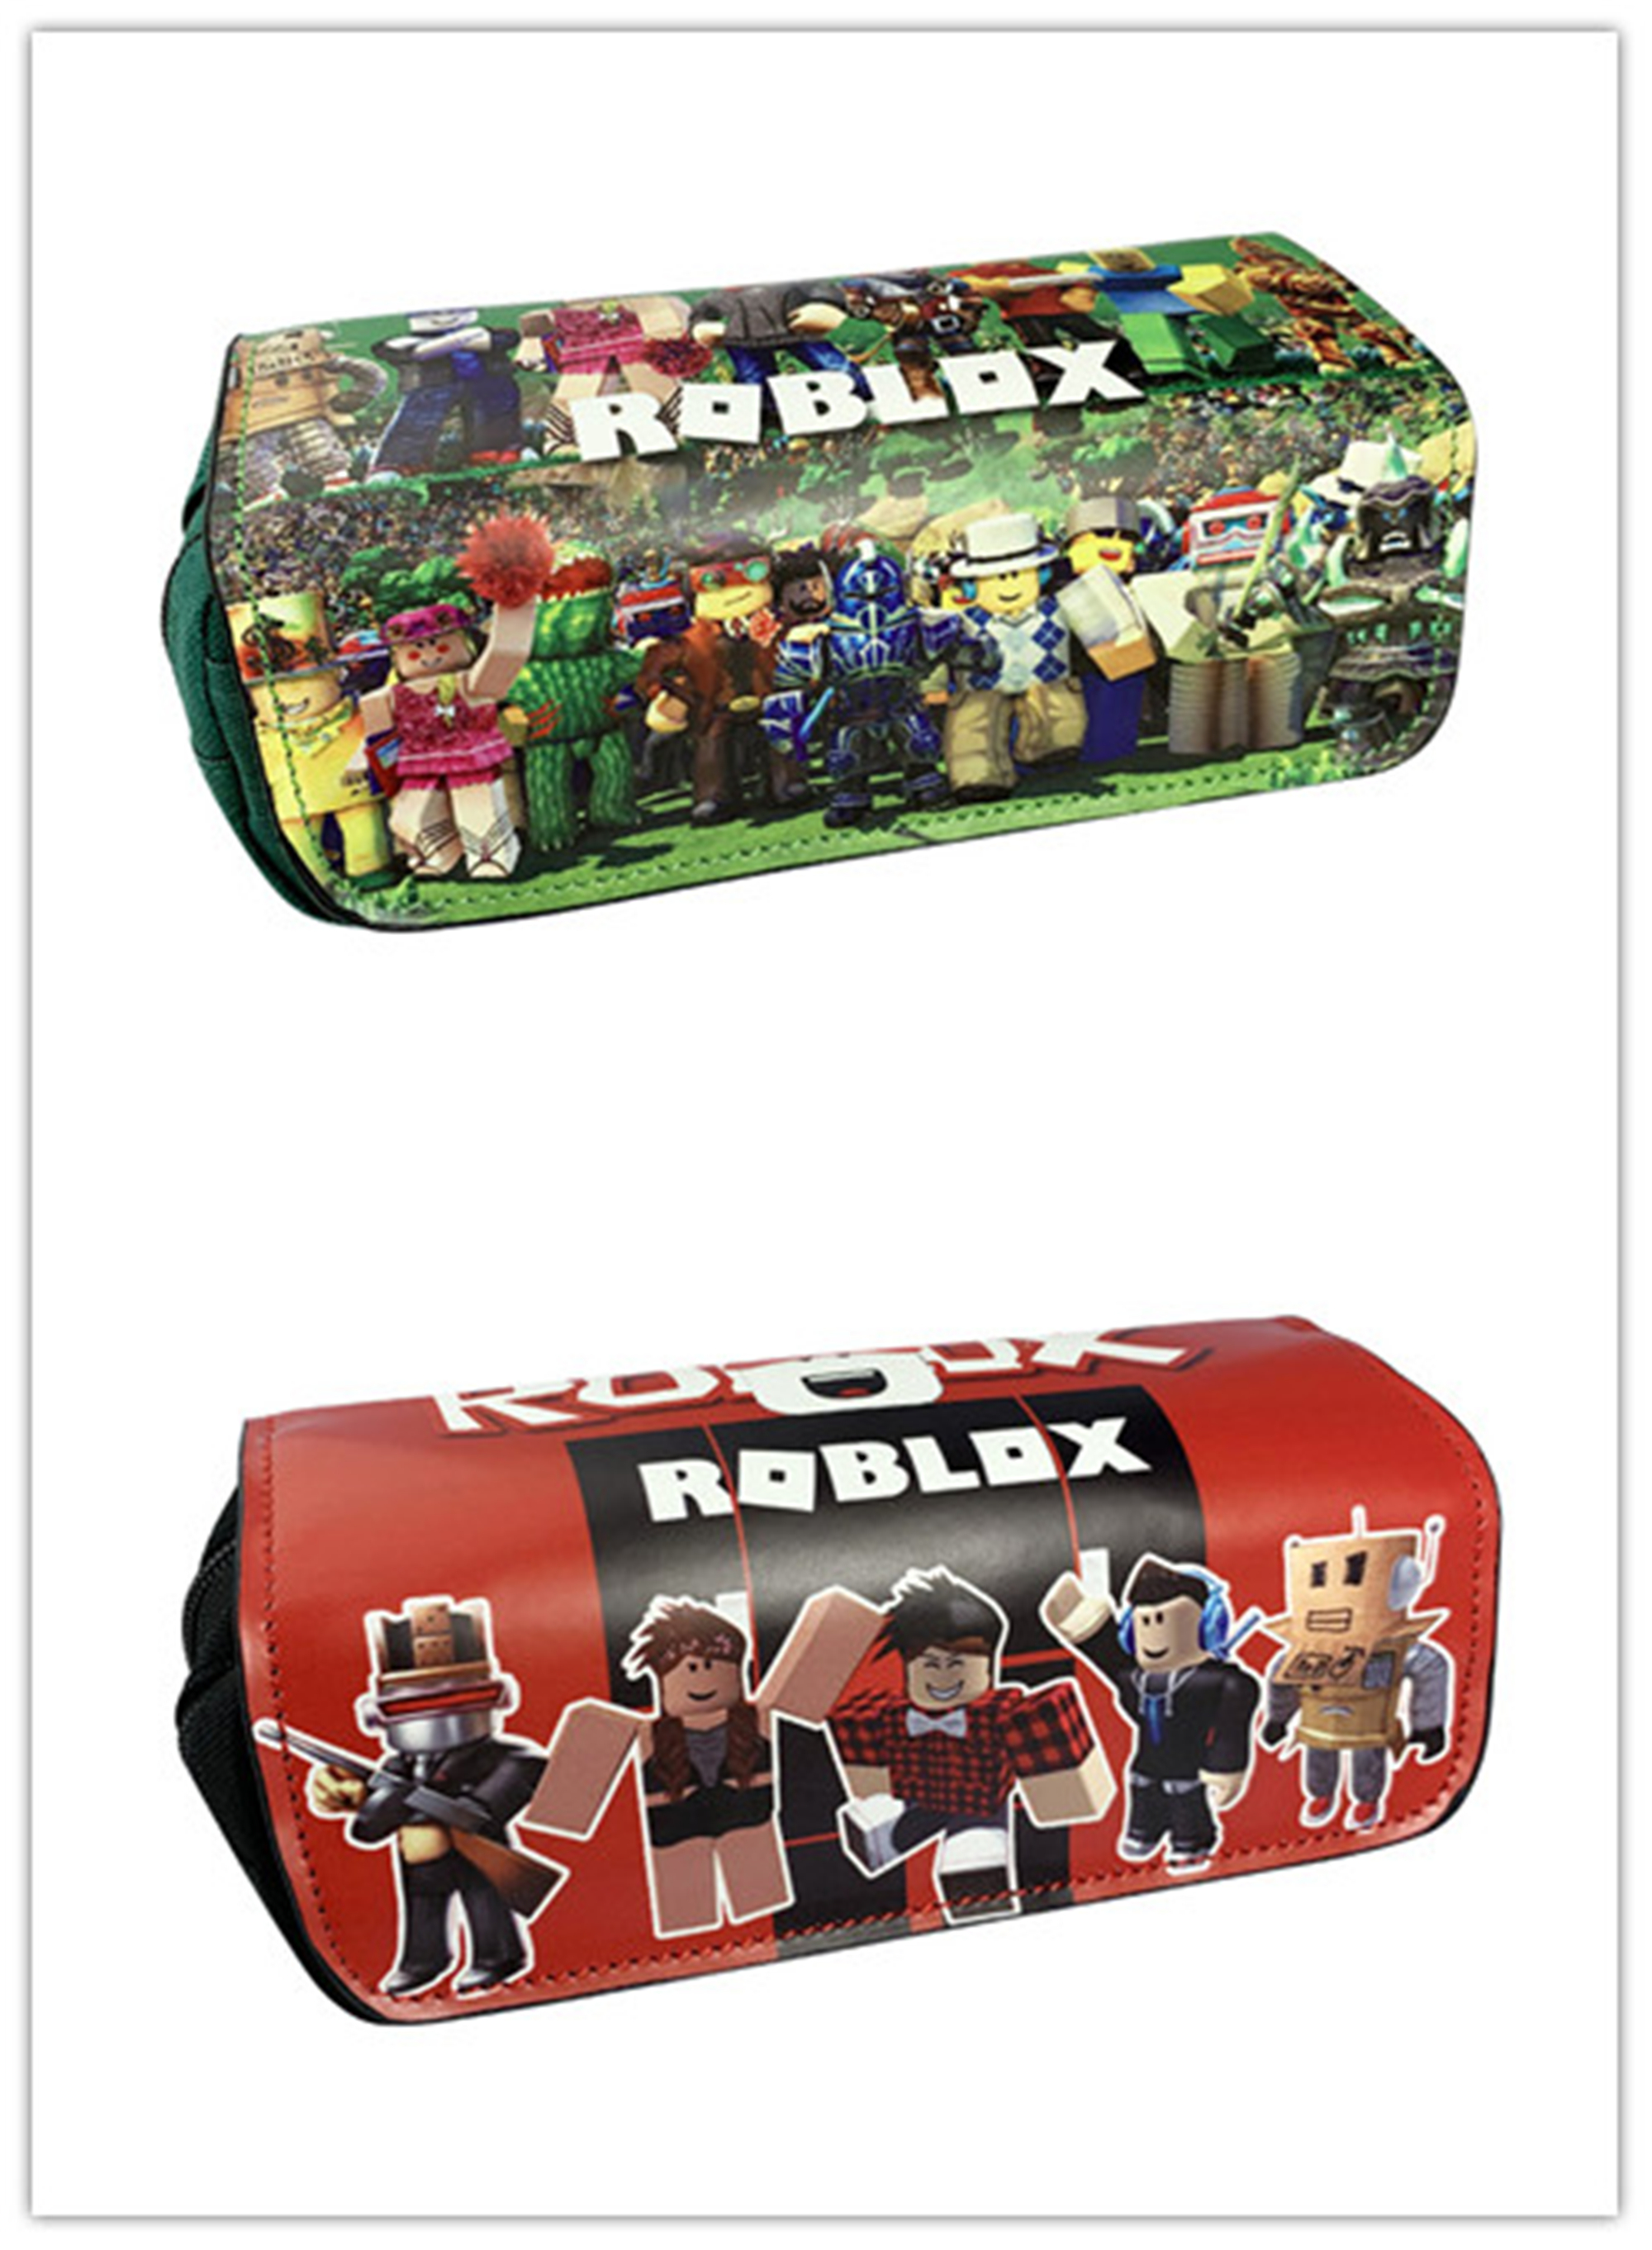 Anime Roblox Logo Pencil Case New Students Stationery Bag Girls